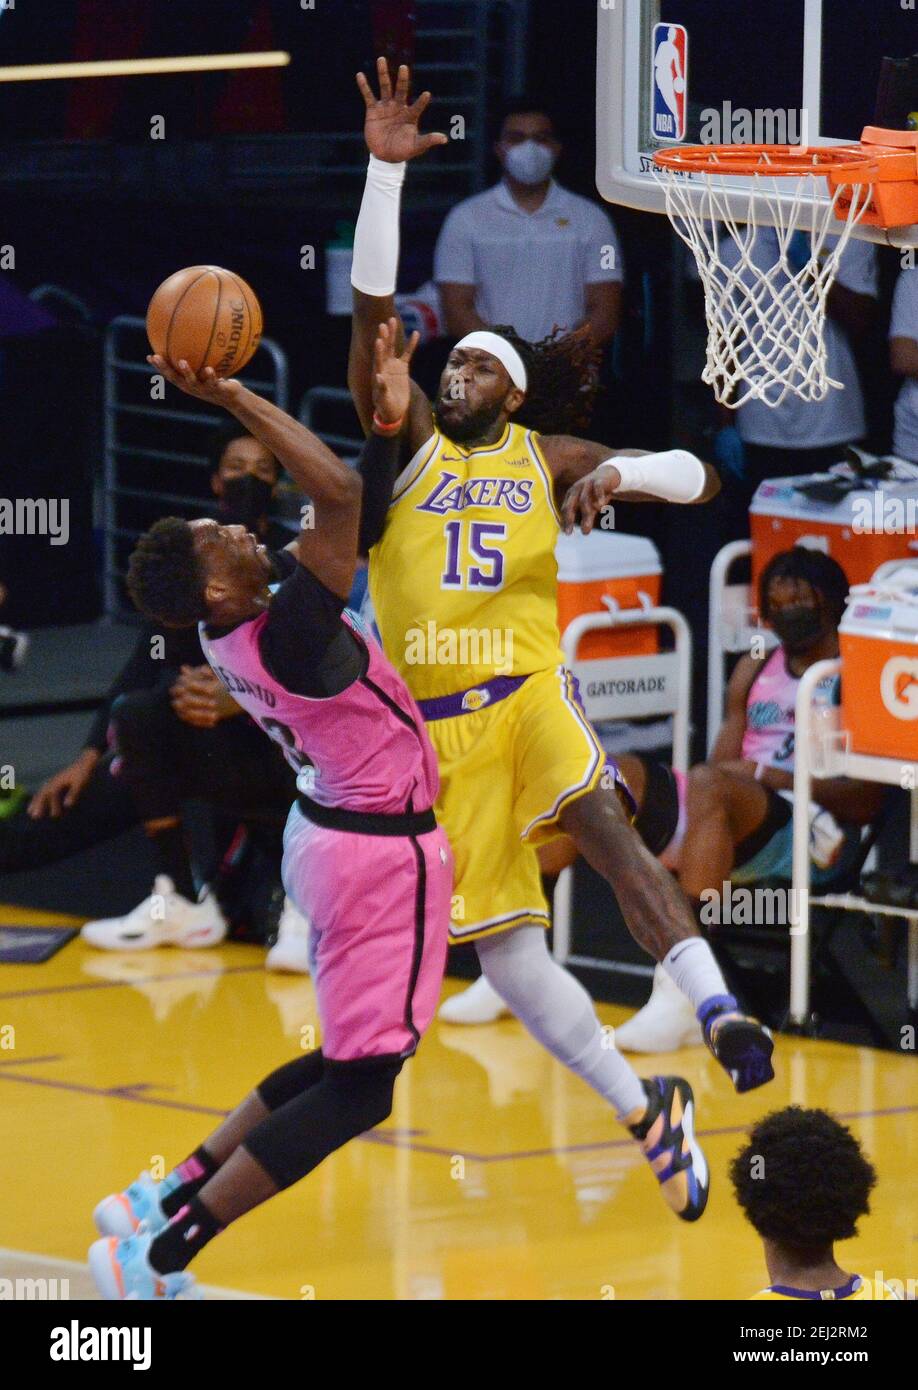 Los Angeles, United States. 20th Feb, 2021. Miami Heat center Bam Adebayo scores on Los Angeles Lakers' center Montrezl Harrell during the first half of the Lakers' 96-94 loss at Staples Center in Los Angeles on Saturday, February 20, 2021. Photo by Jim Ruymen/UPI Credit: UPI/Alamy Live News Stock Photo